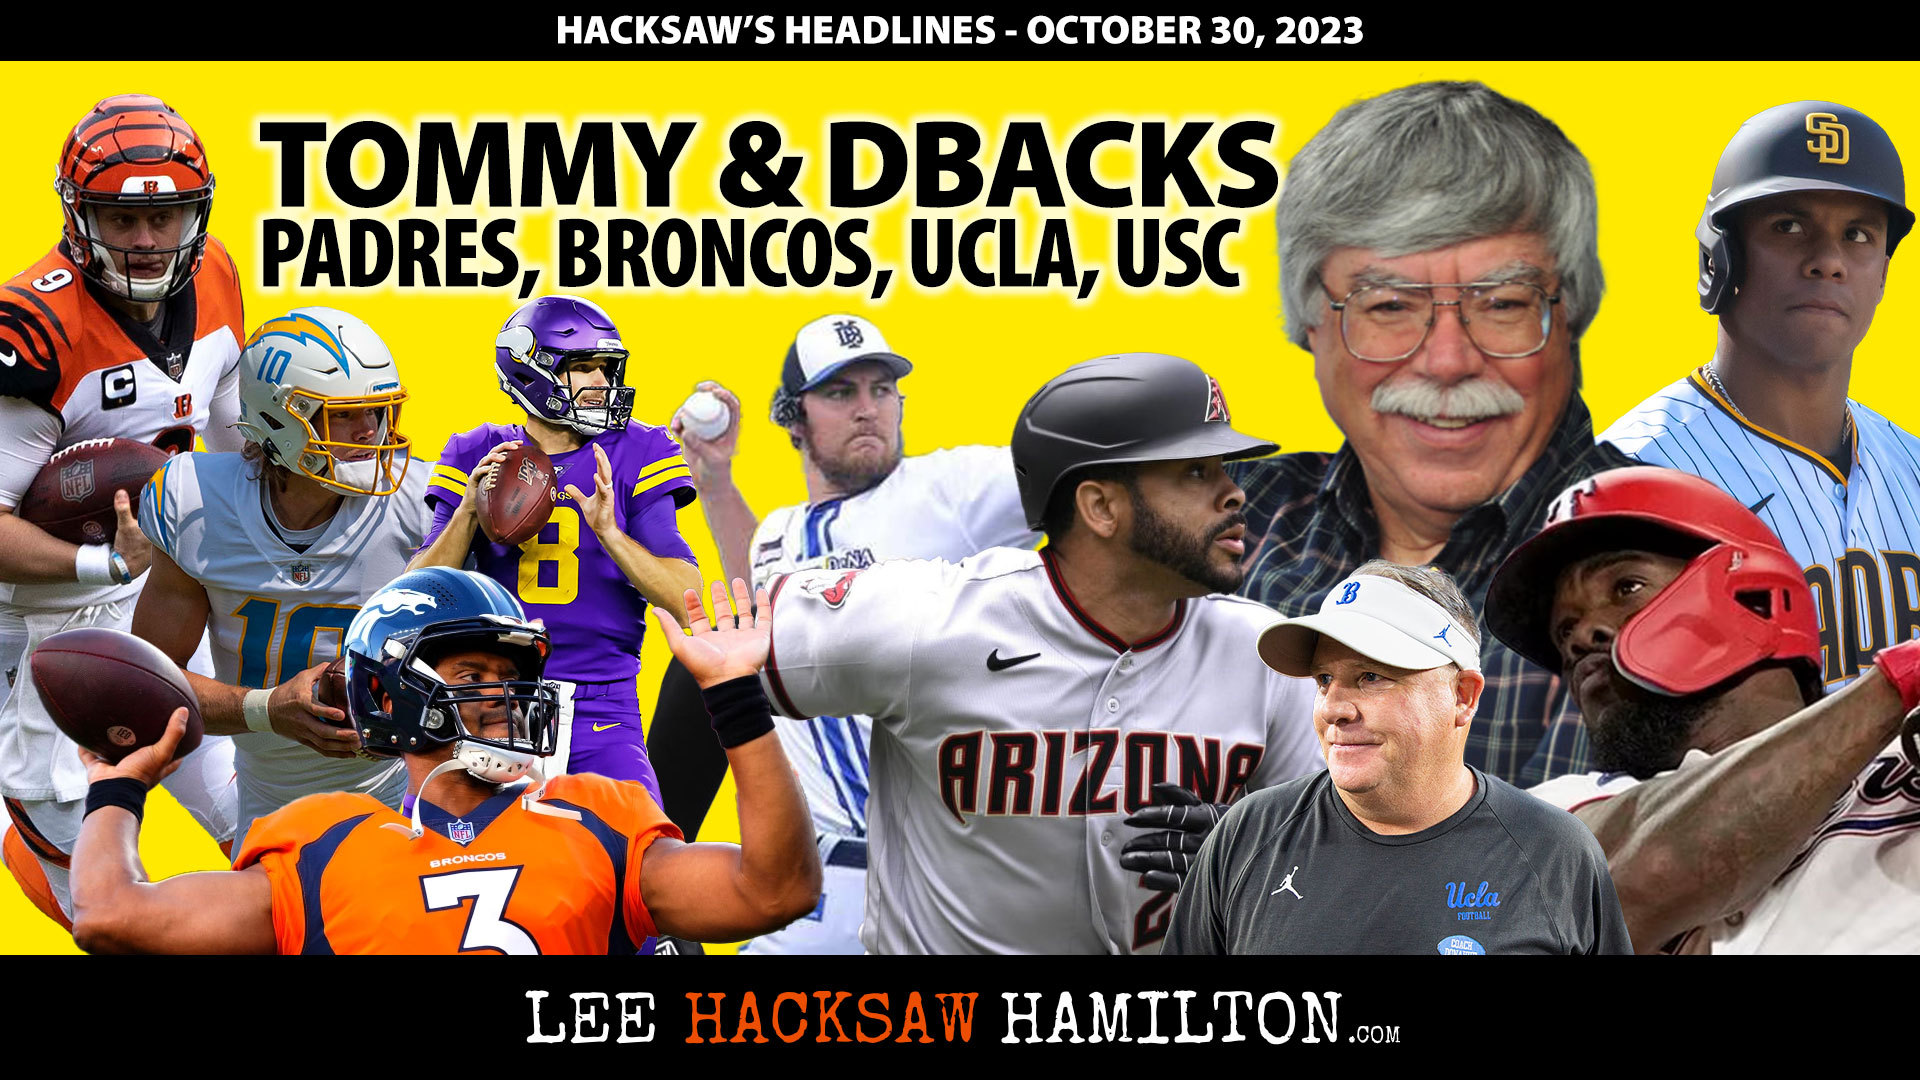 Lee Hacksaw Hamilton discusses World Series, Juan Soto trade?, Angels manager candidates, Chiefs, Broncos, Bengals, 49ers, Chargers